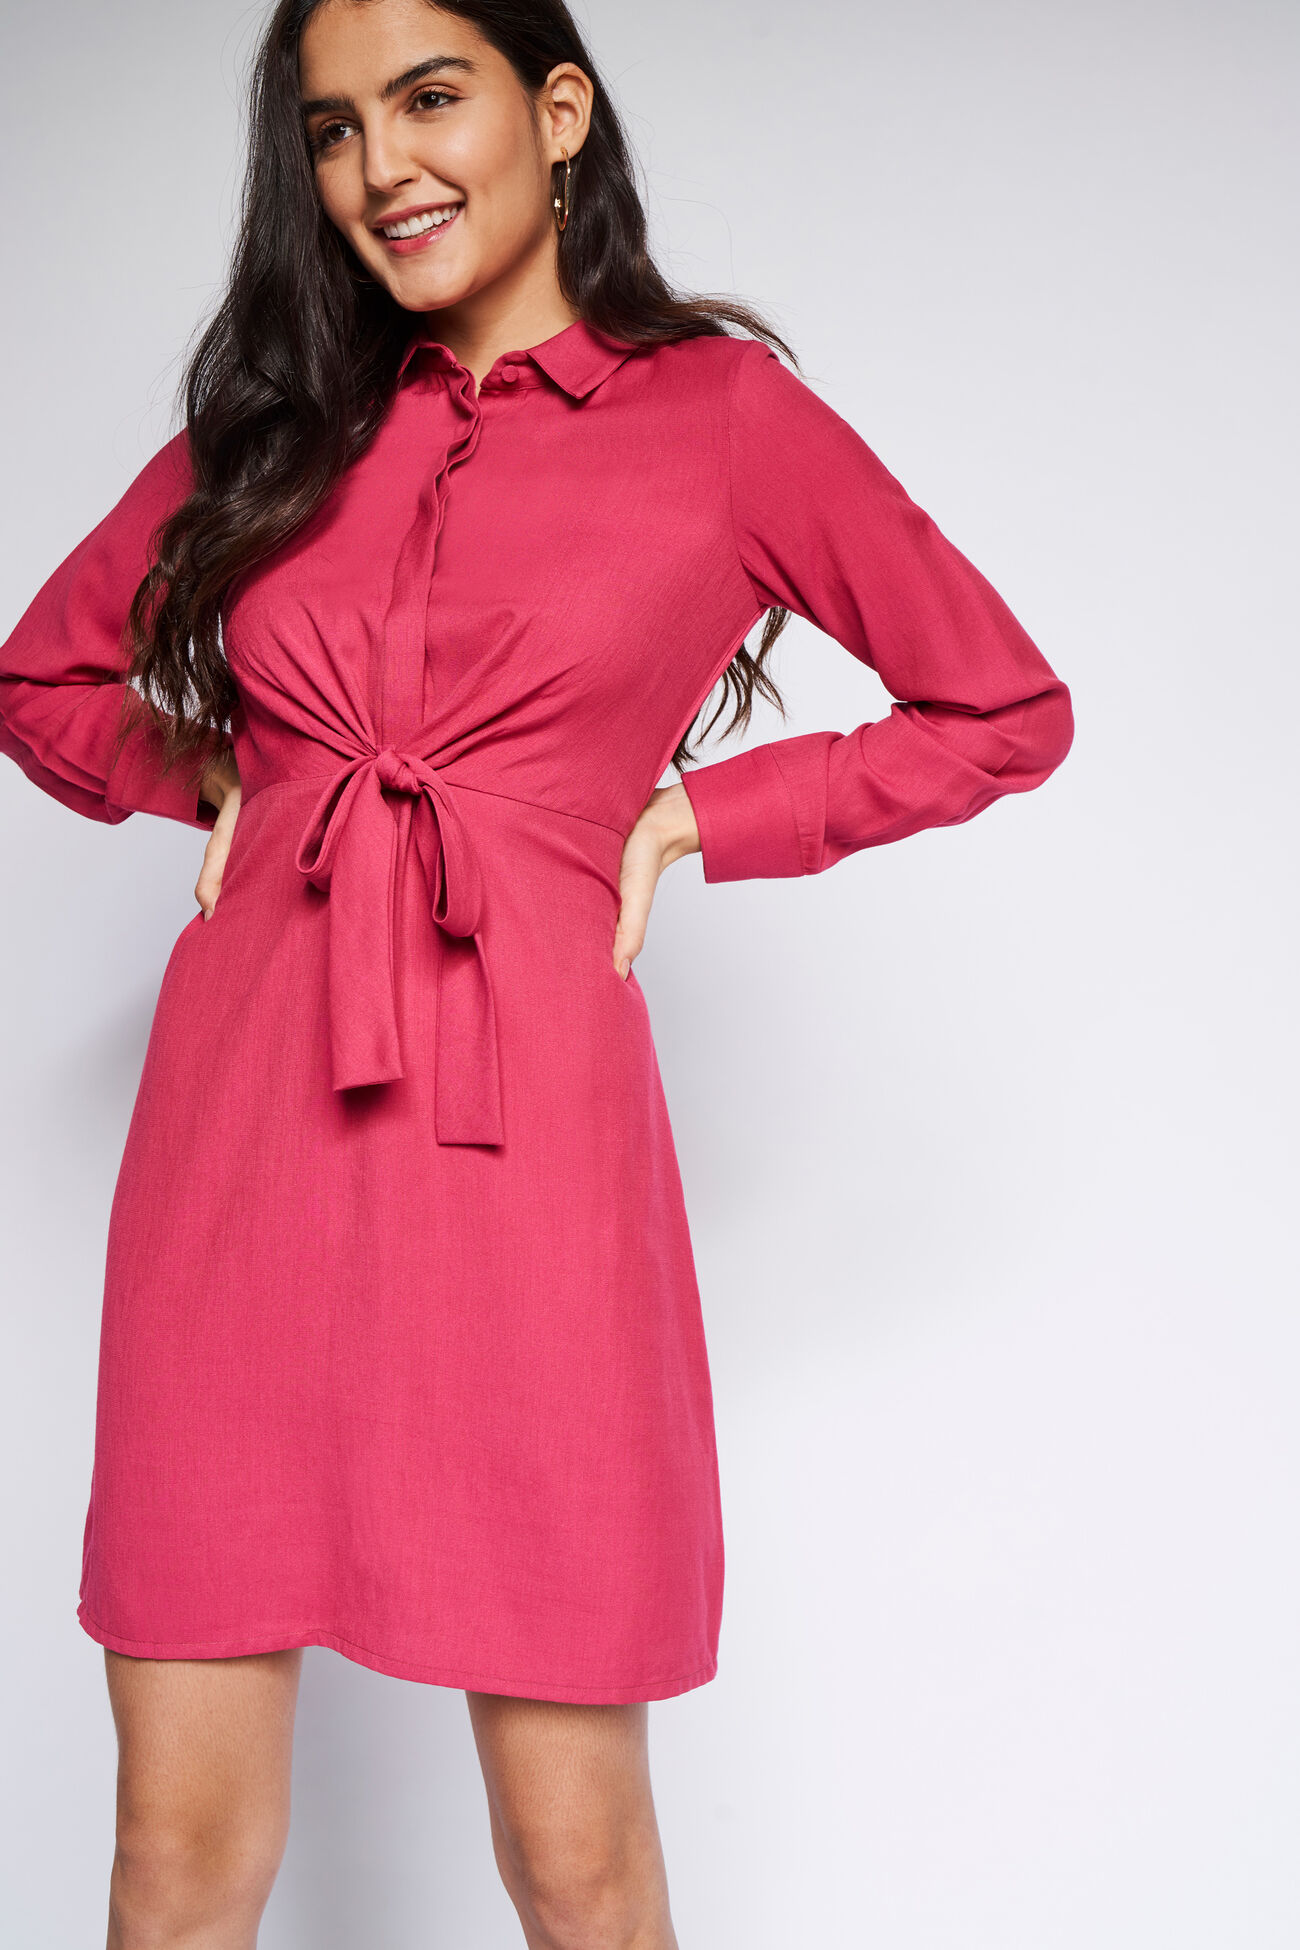 Pink Solid Straight Dress, Pink, image 1